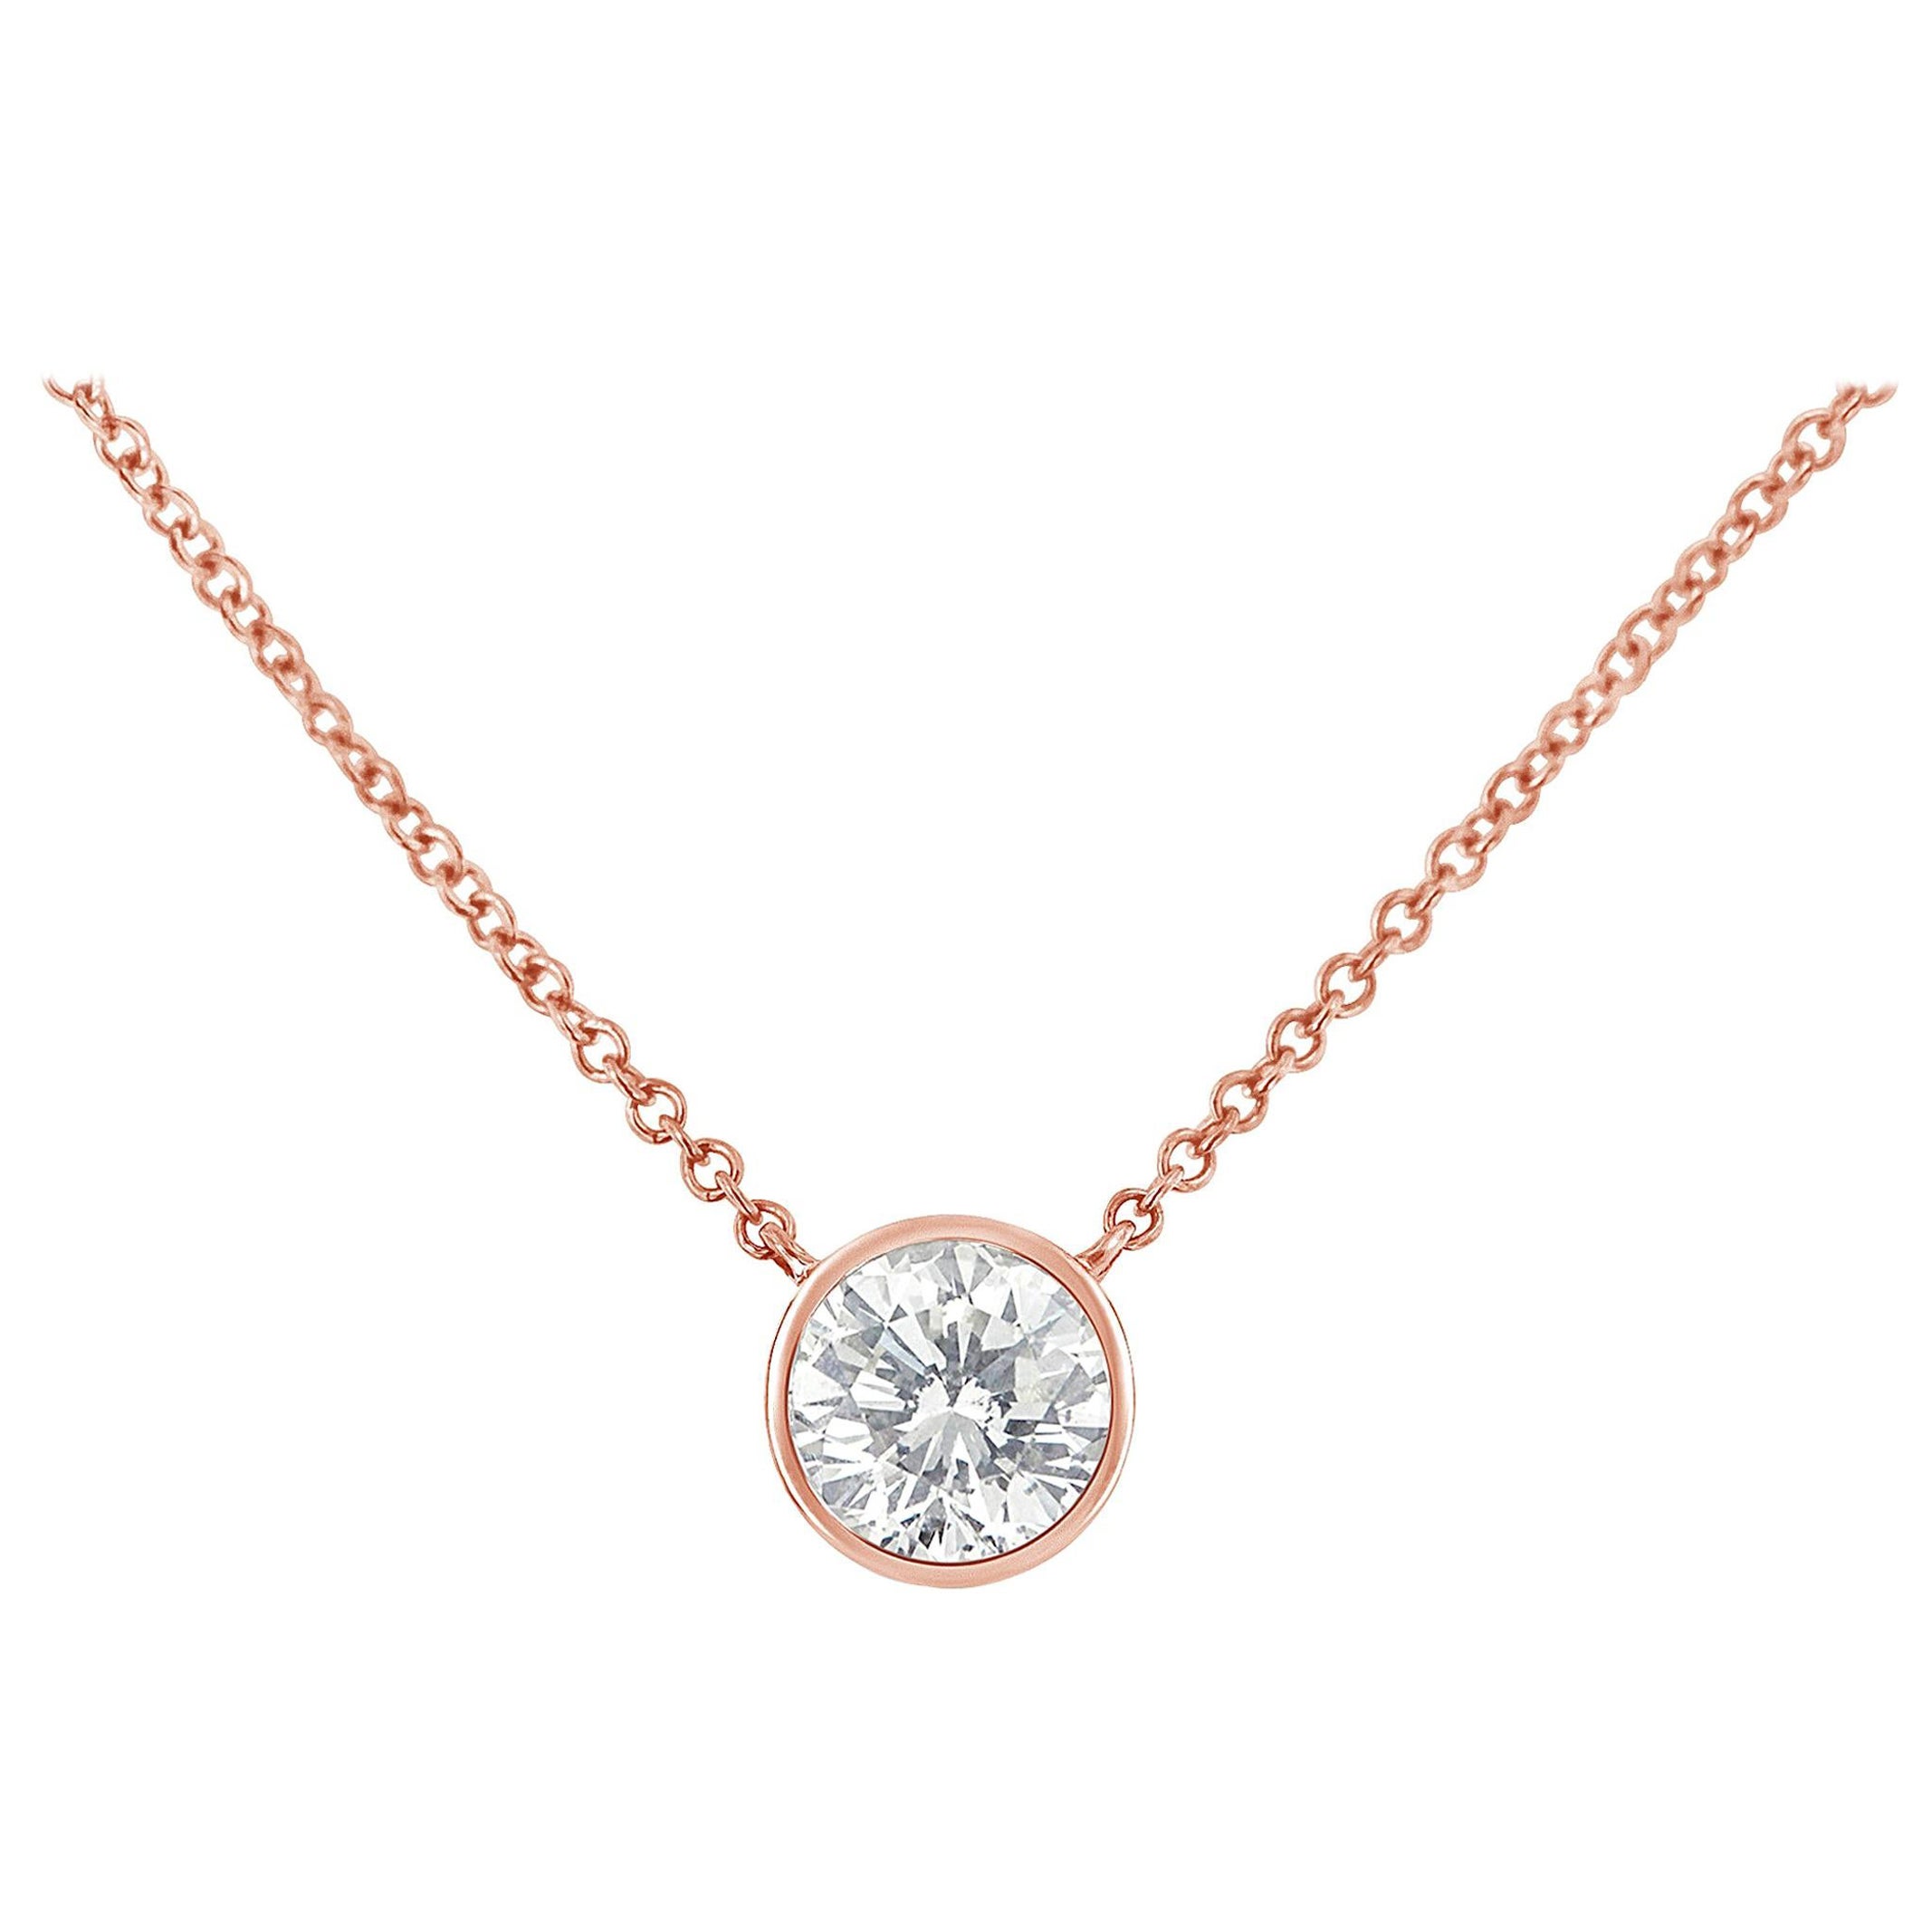 14K Rose Gold Over Sterling Silver 1/3 Carat Diamond Solitaire Pendant Necklace